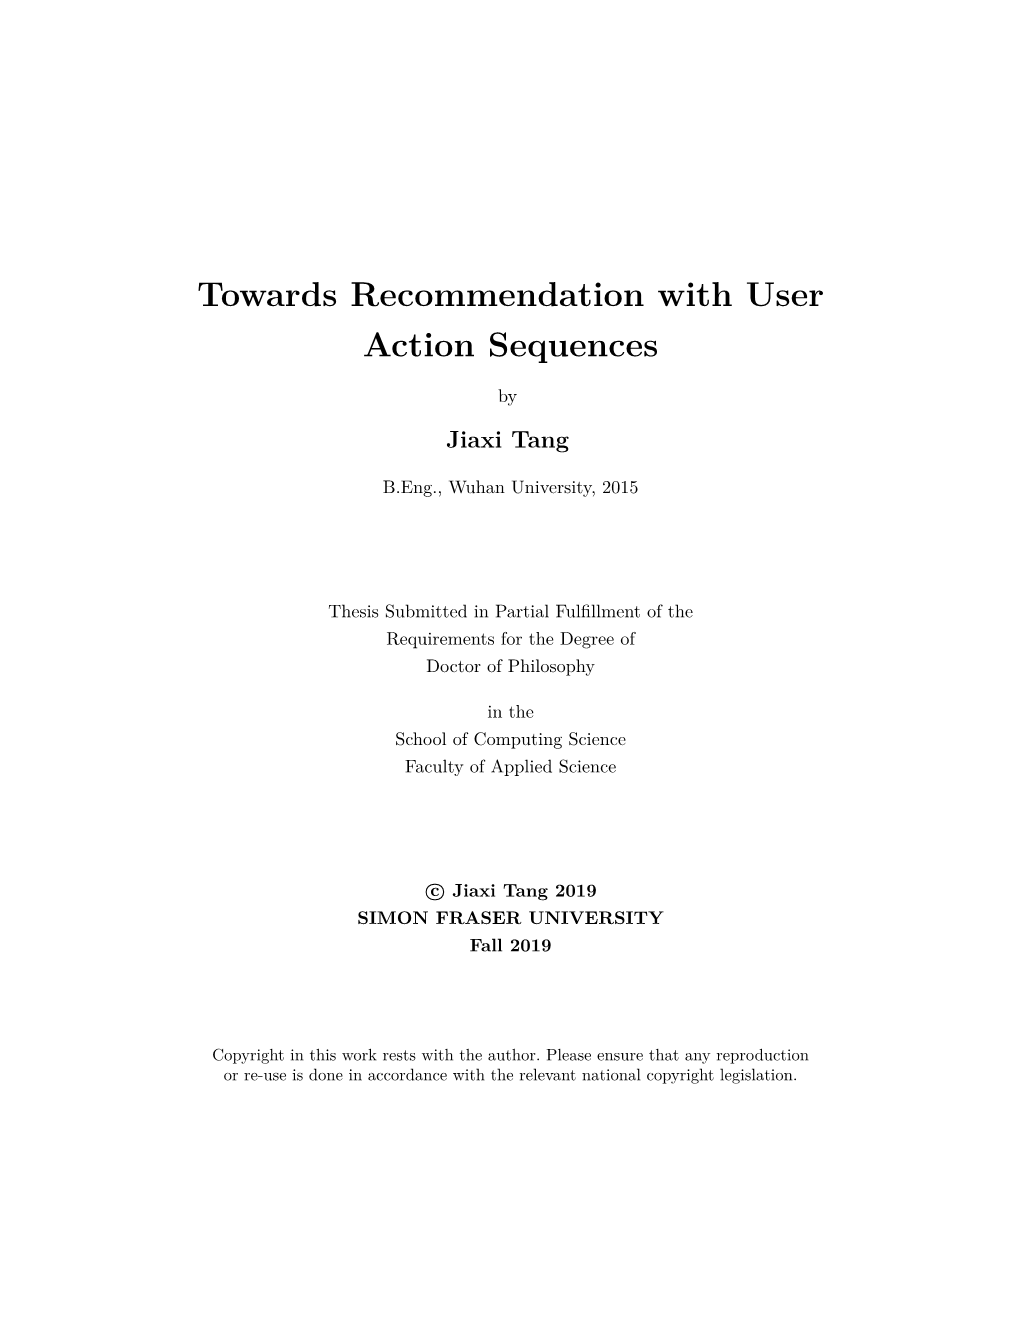 Towards Recommendation with User Action Sequences